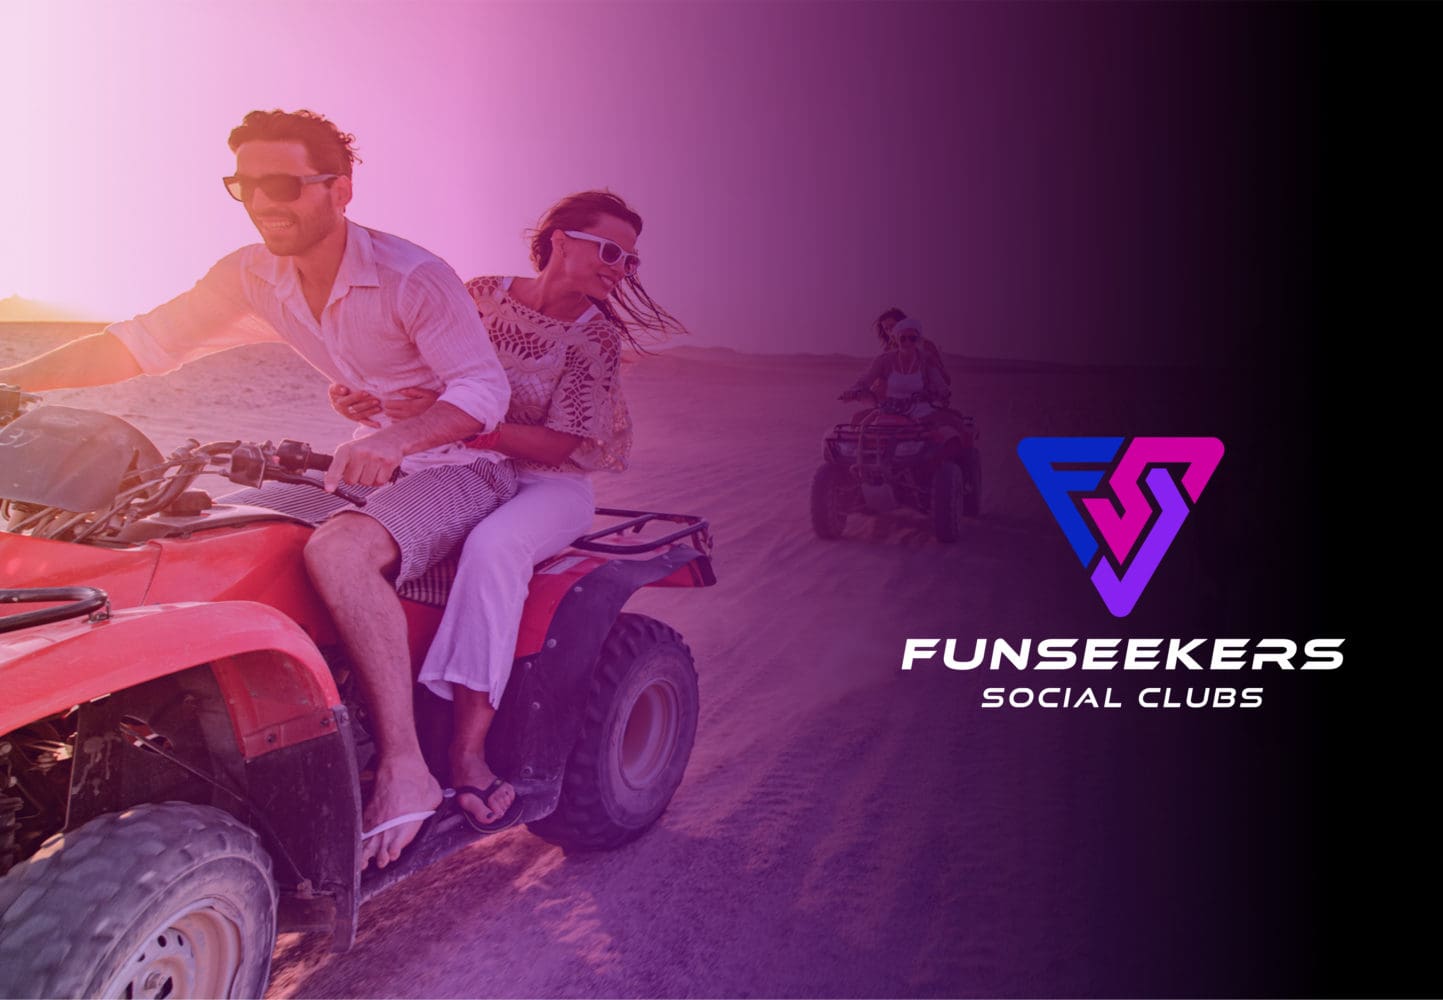 Fun Seekers - Agency Creative is excited to announce our new client Funseekers, an all access social and travel club for singles and couples.